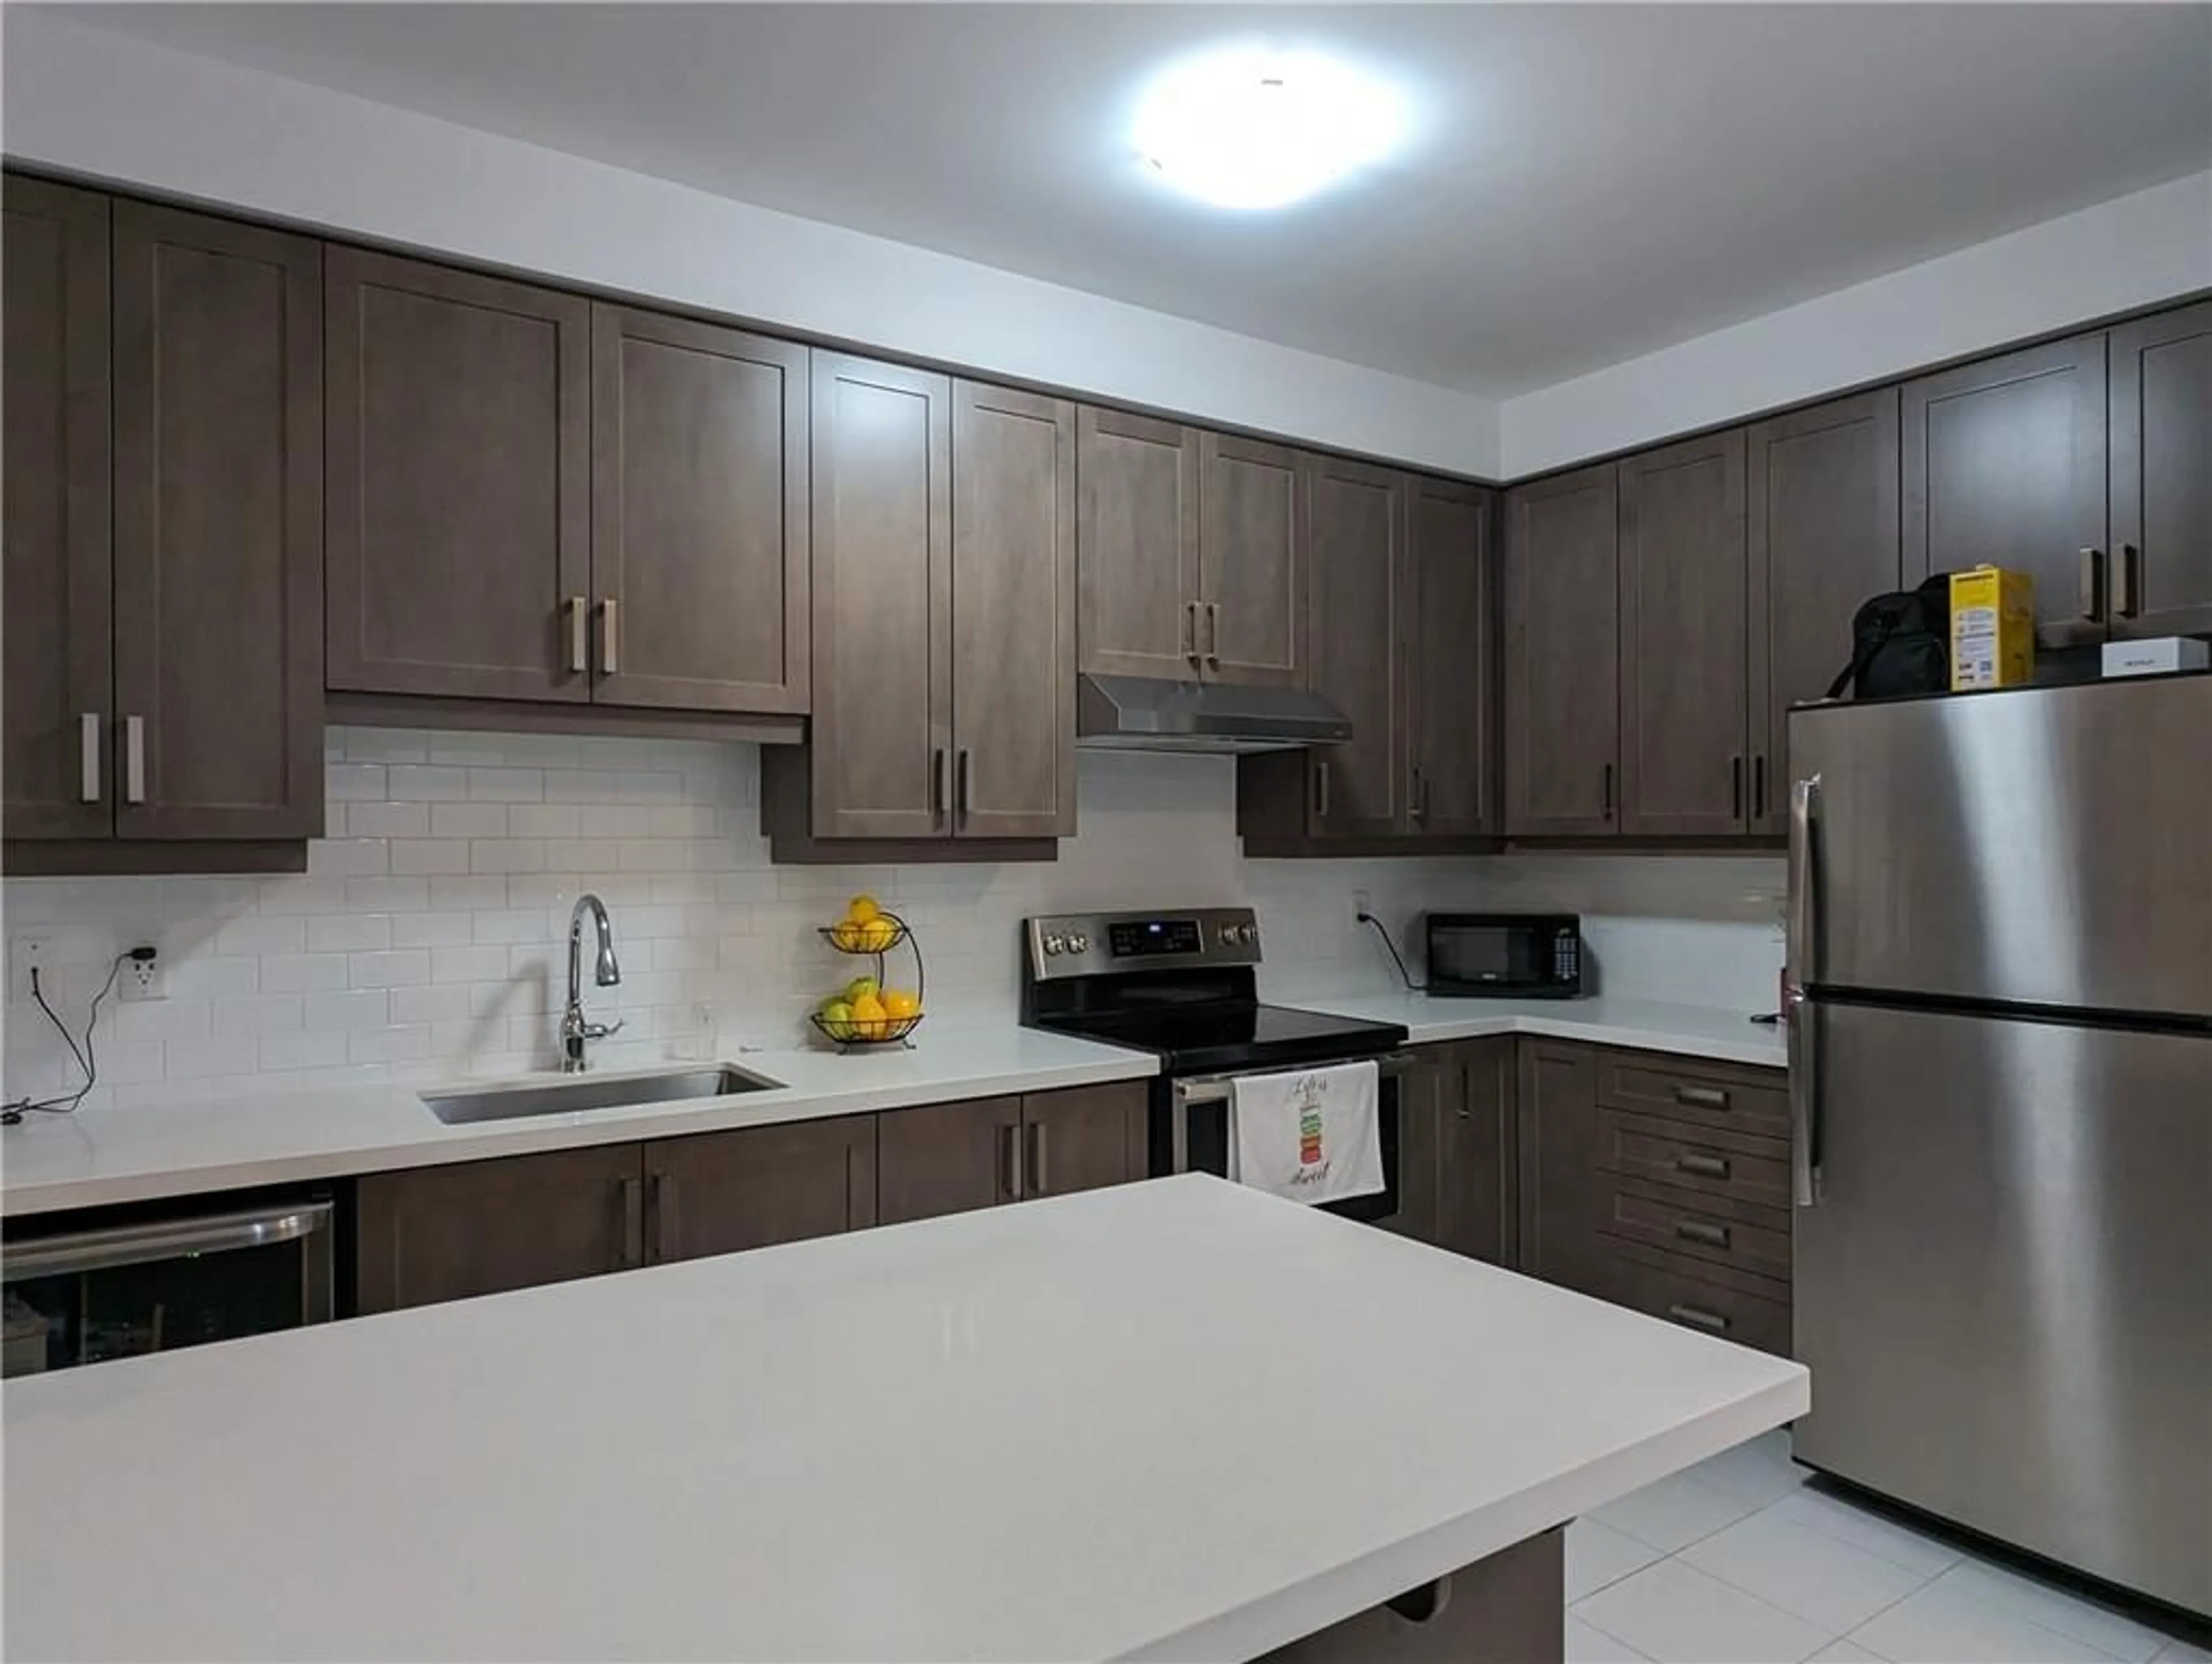 Standard kitchen for 8 GREENWICH Ave, Stoney Creek Ontario L8J 2R9